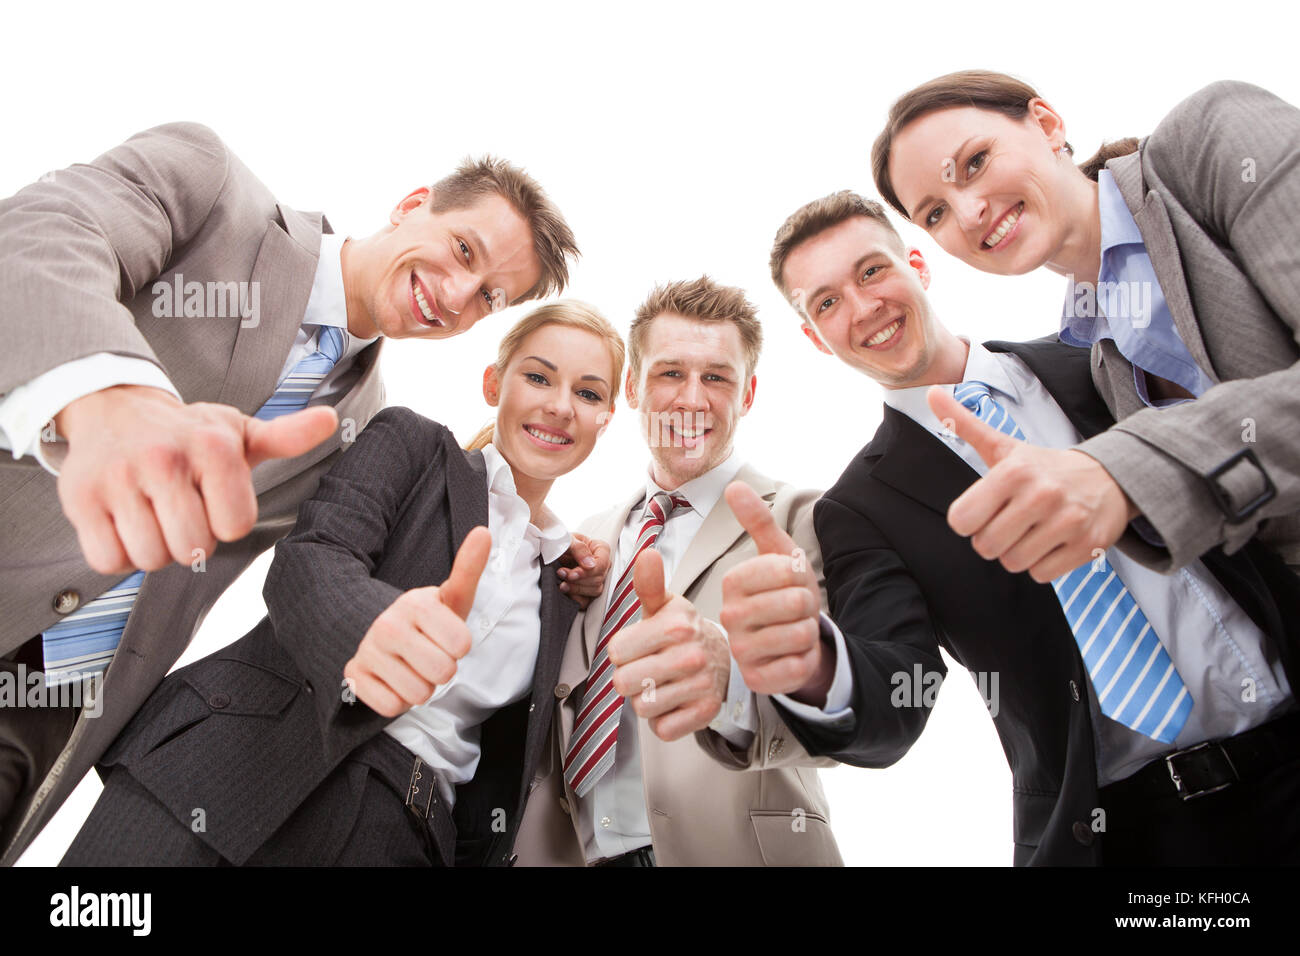 Low angle portrait of confident business team showing Thumbs up against white background Banque D'Images